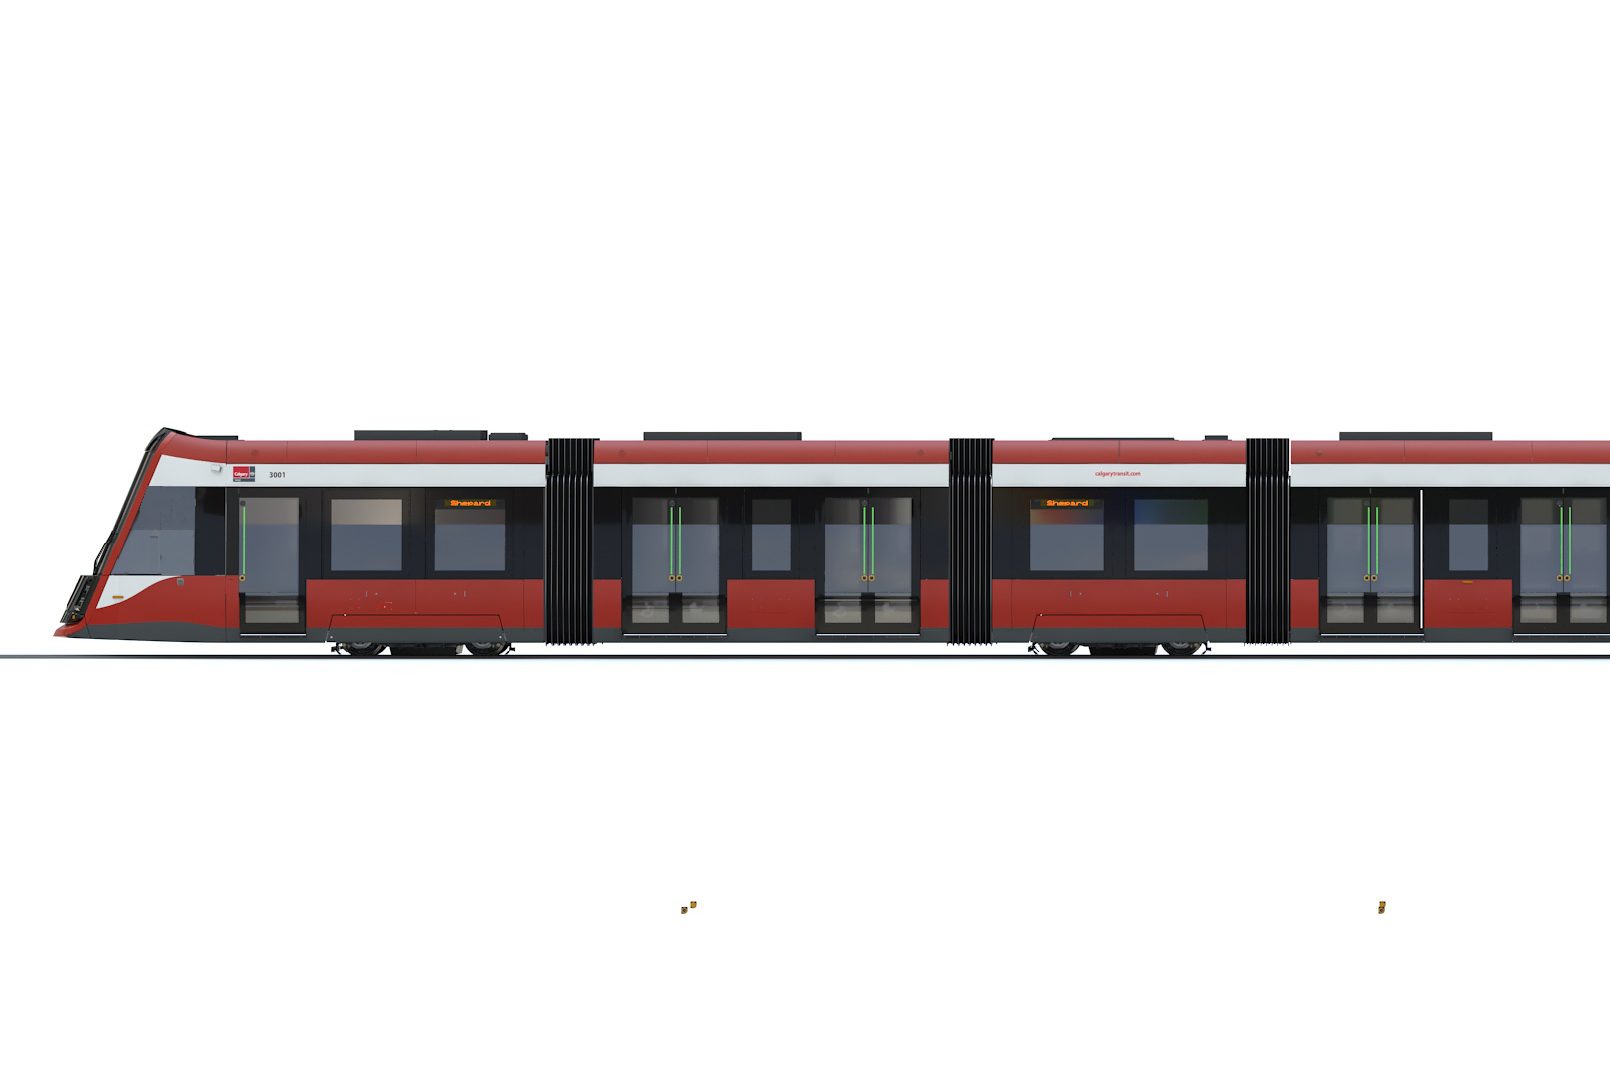 The Urbos 100 will be Calgary Transit’s first low-floor LRV